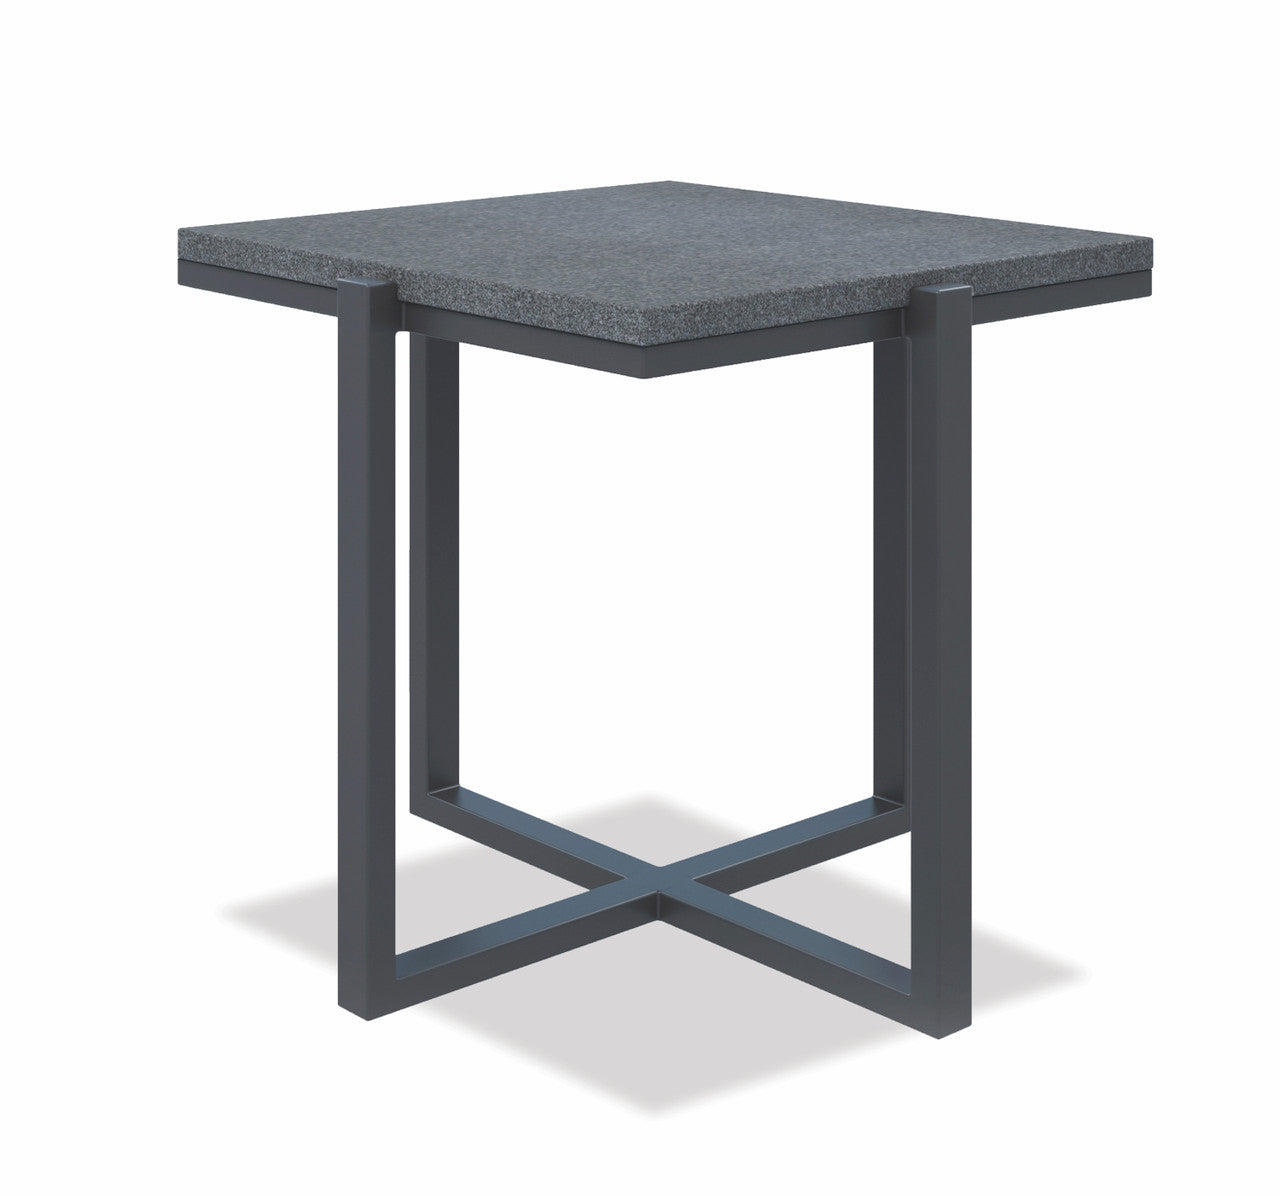 Sunset West Bazaar Square End Table with Slate Finish